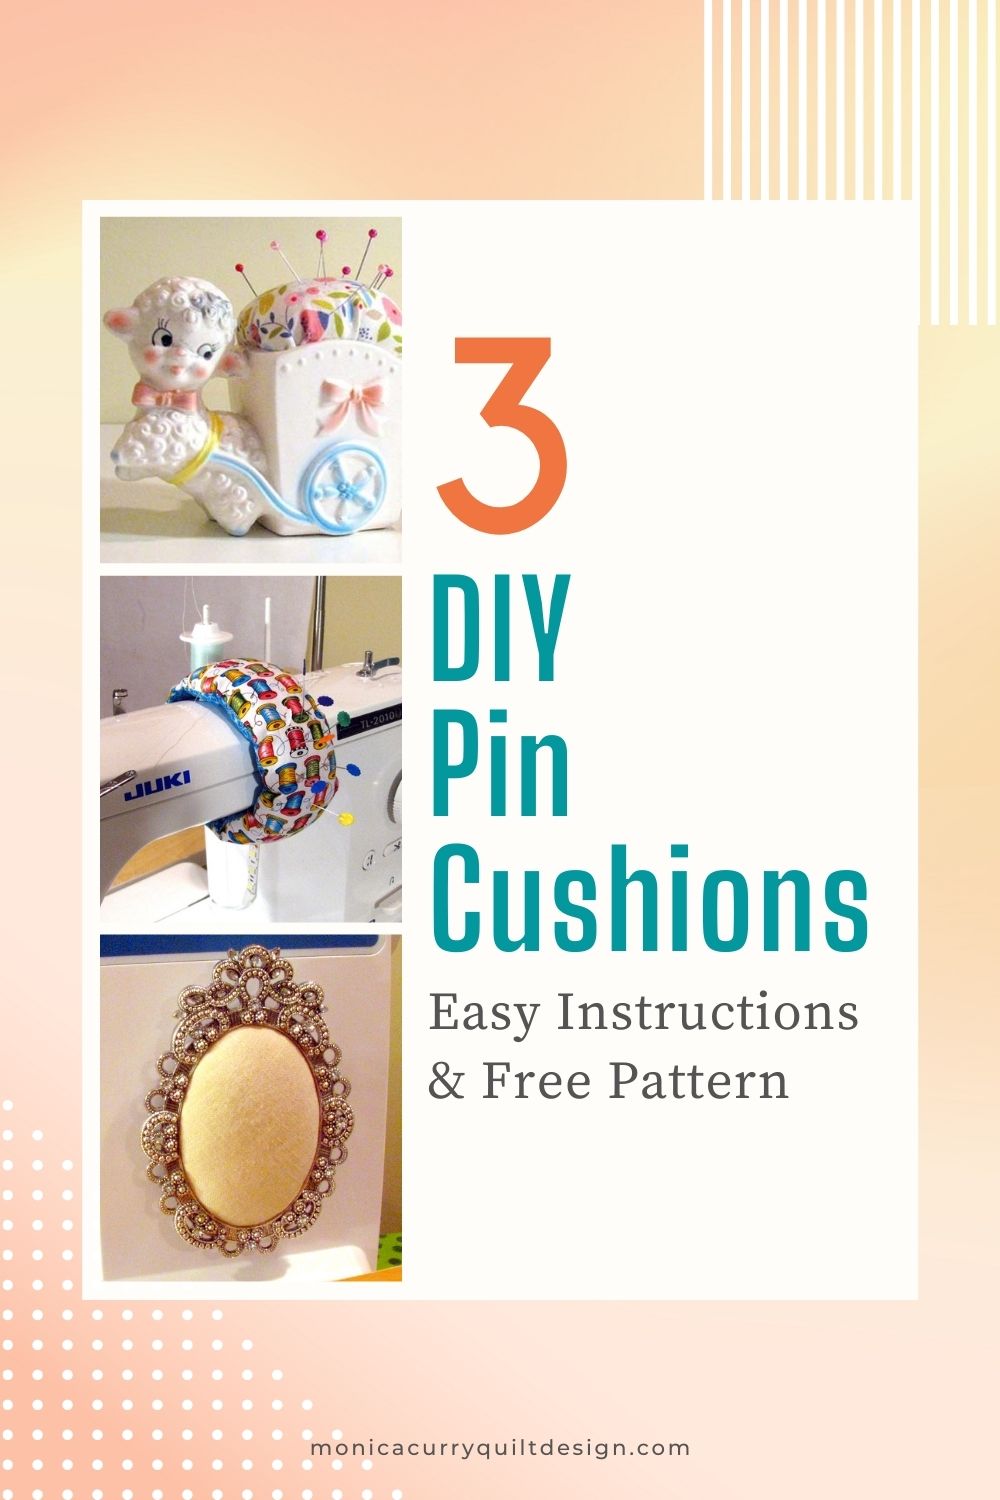 Monica Curry Quilt Design: Three DIY Pin Cushion Ideas with Tutorials and  Free pattern